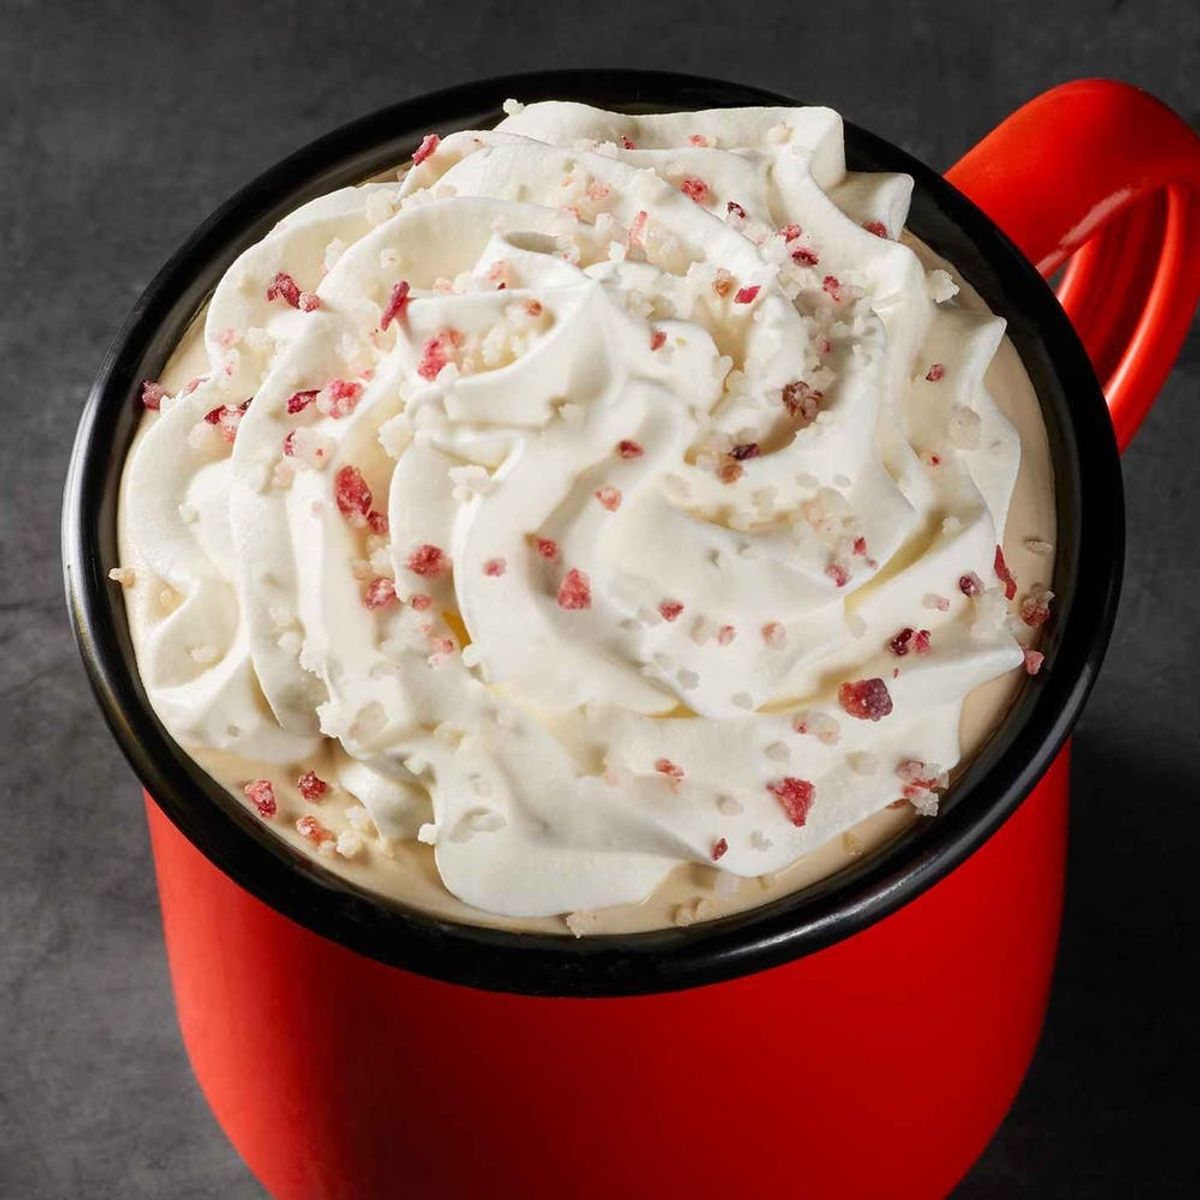 Starbucks’ New Holiday Drinks Are a Fireside Dream